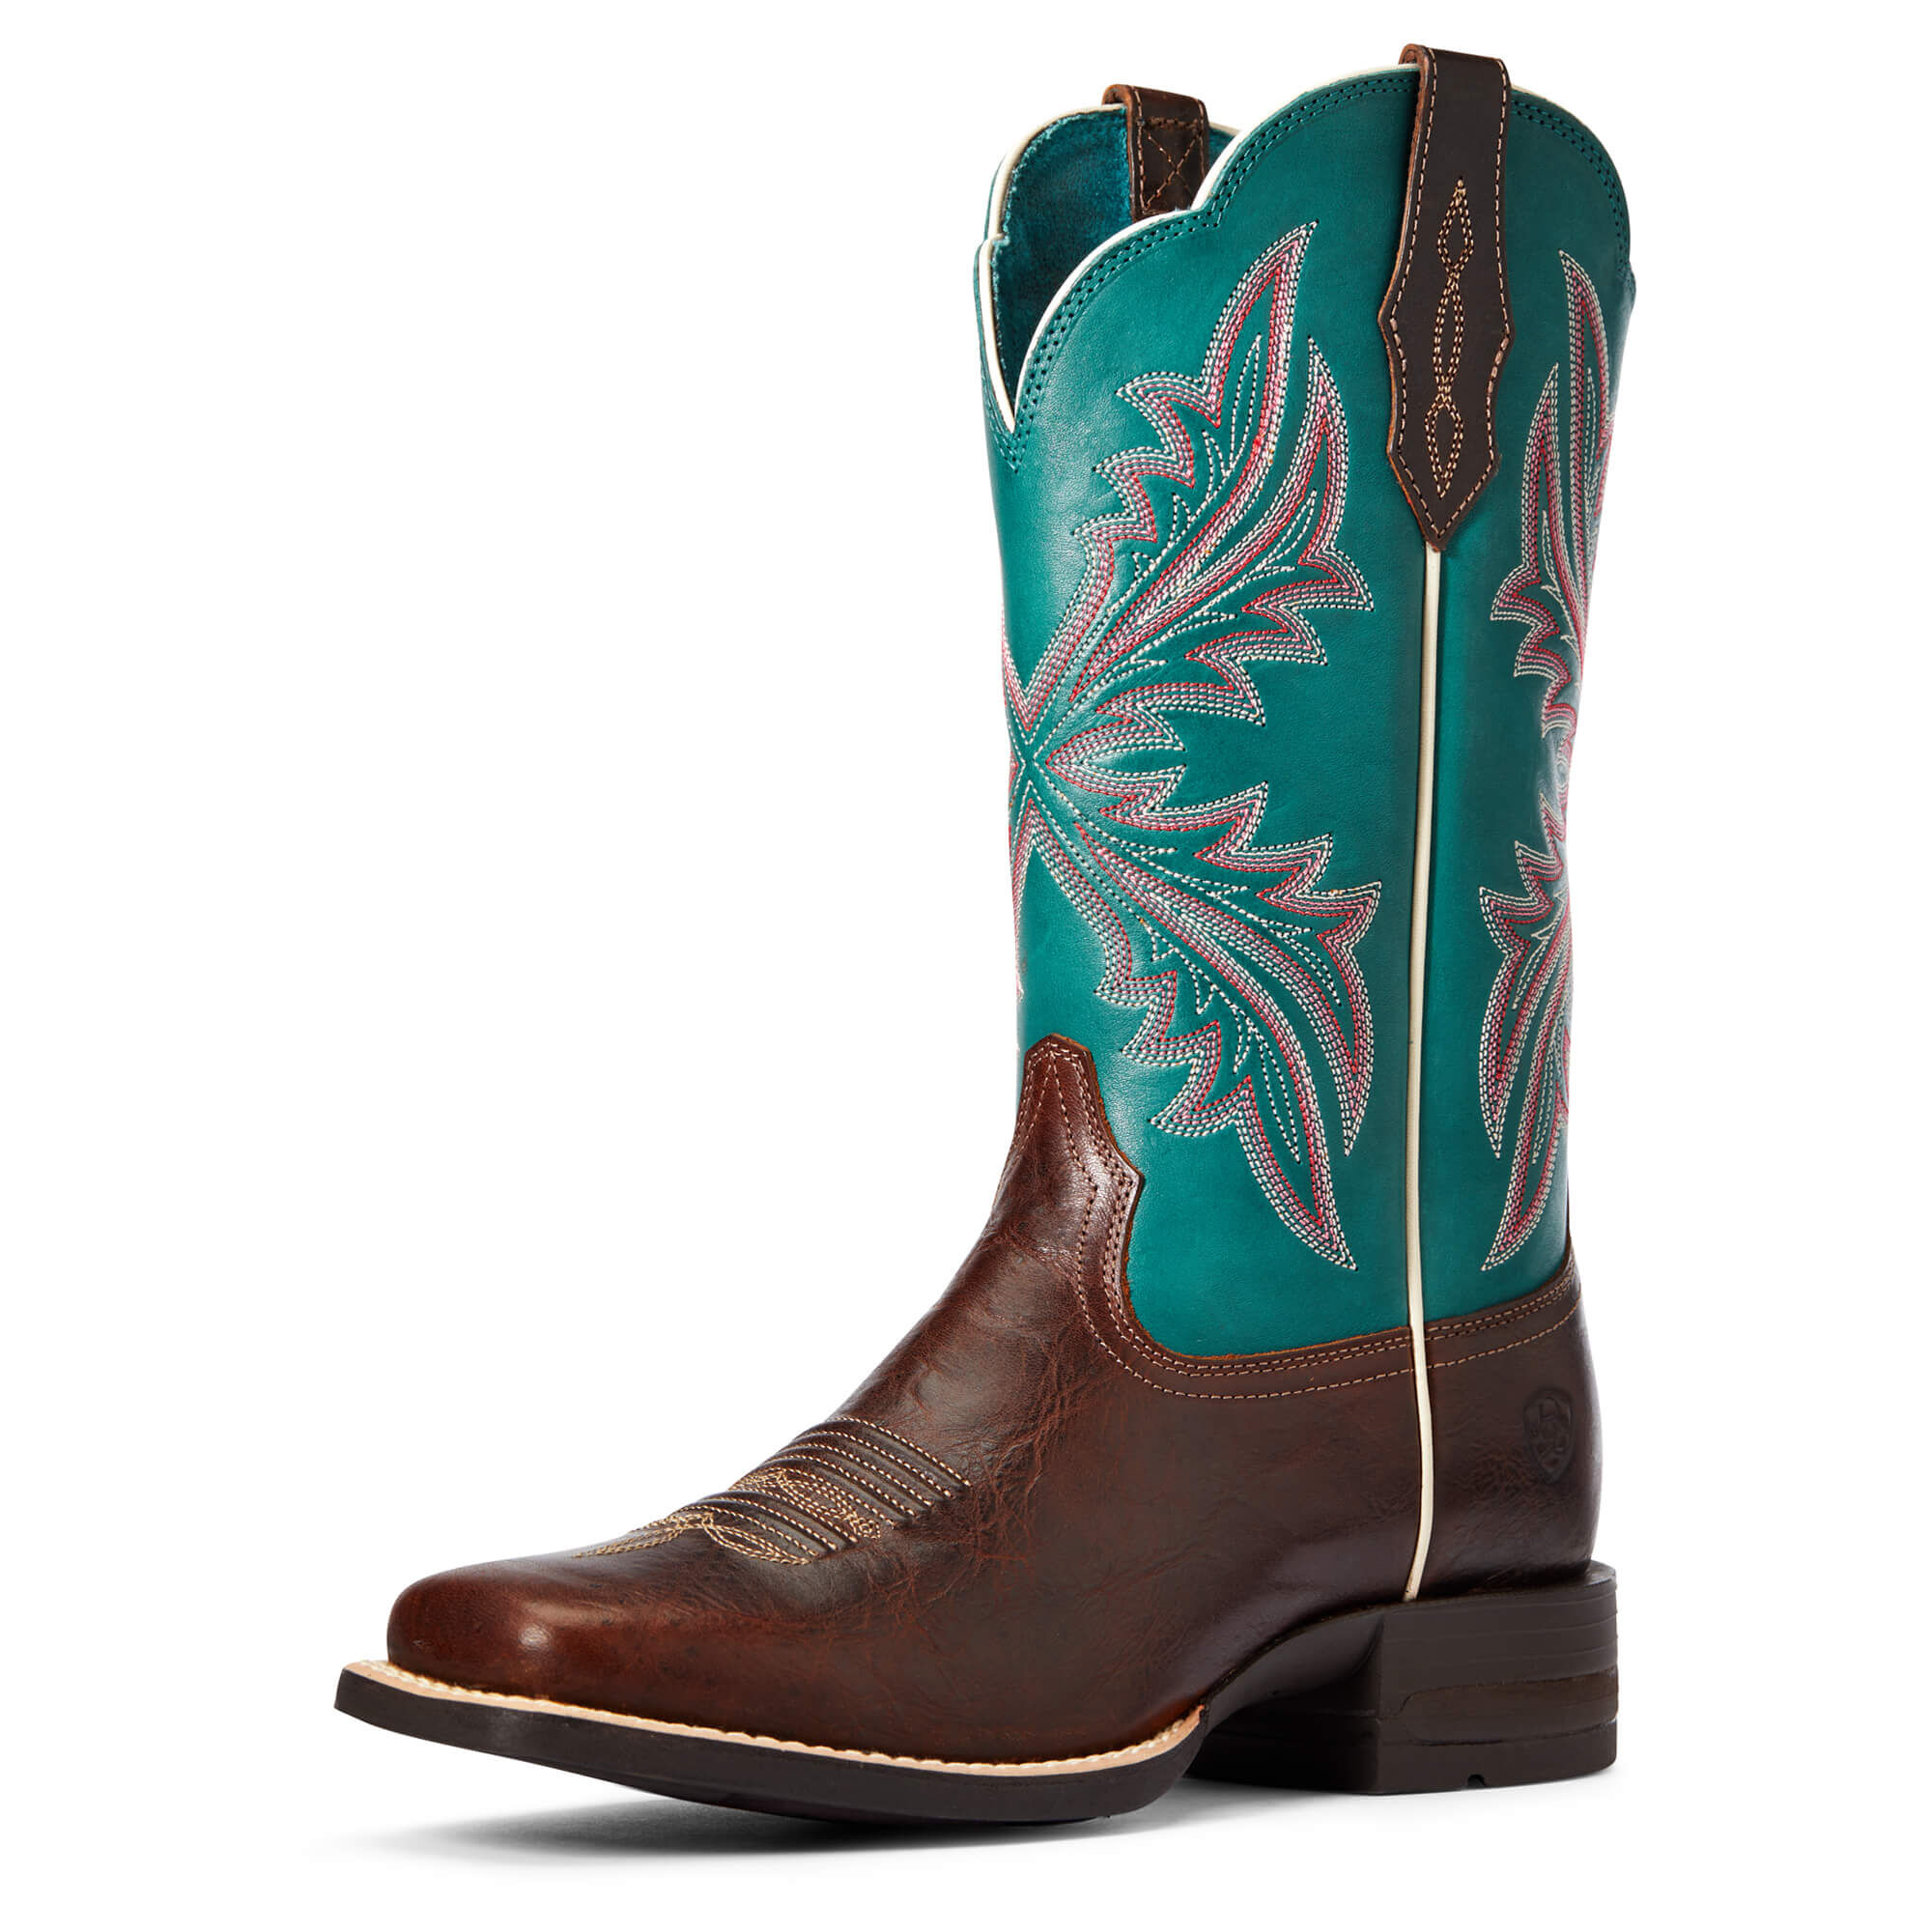 Women's West Bound Western Boots in Brown Patina Leather  by Ariat